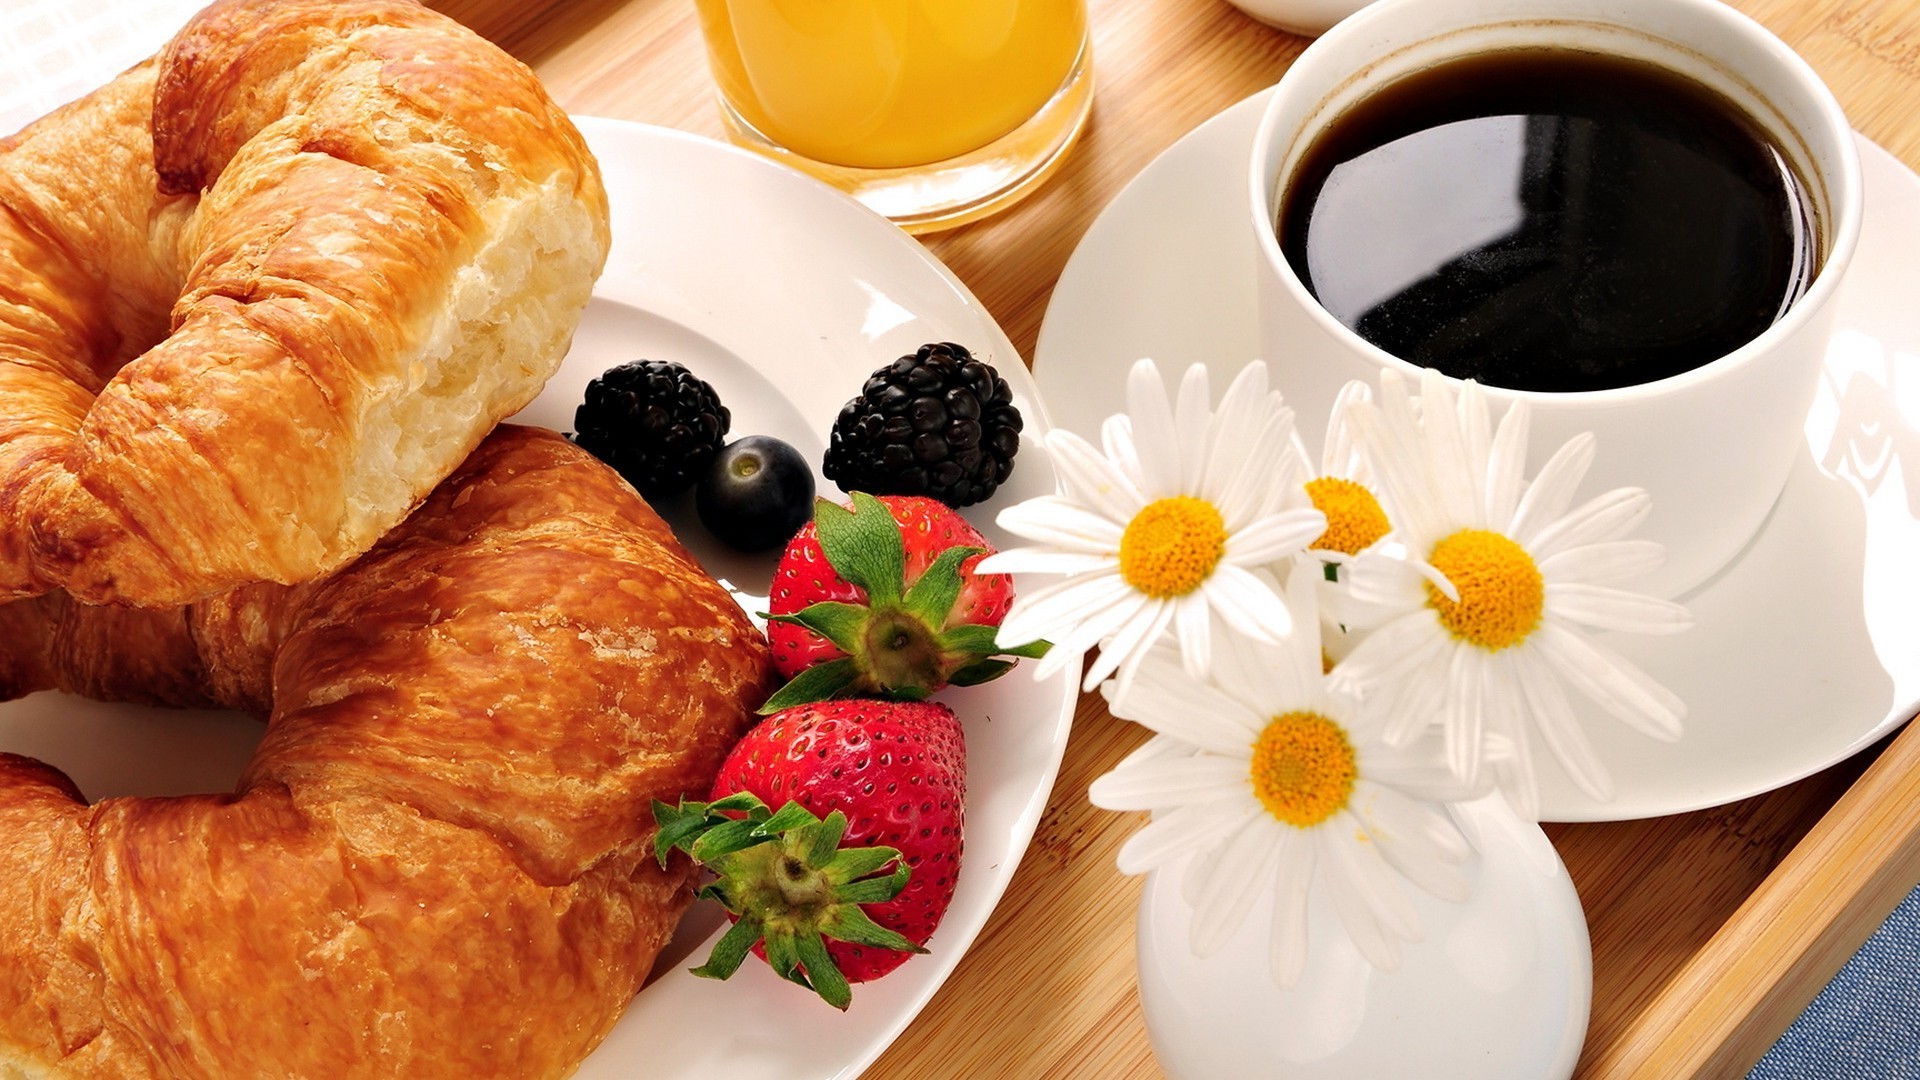 coffee breakfast dawn delicious croissant cup hot food sugar jam drink bread pastry traditional sweet espresso plate continental nutrition